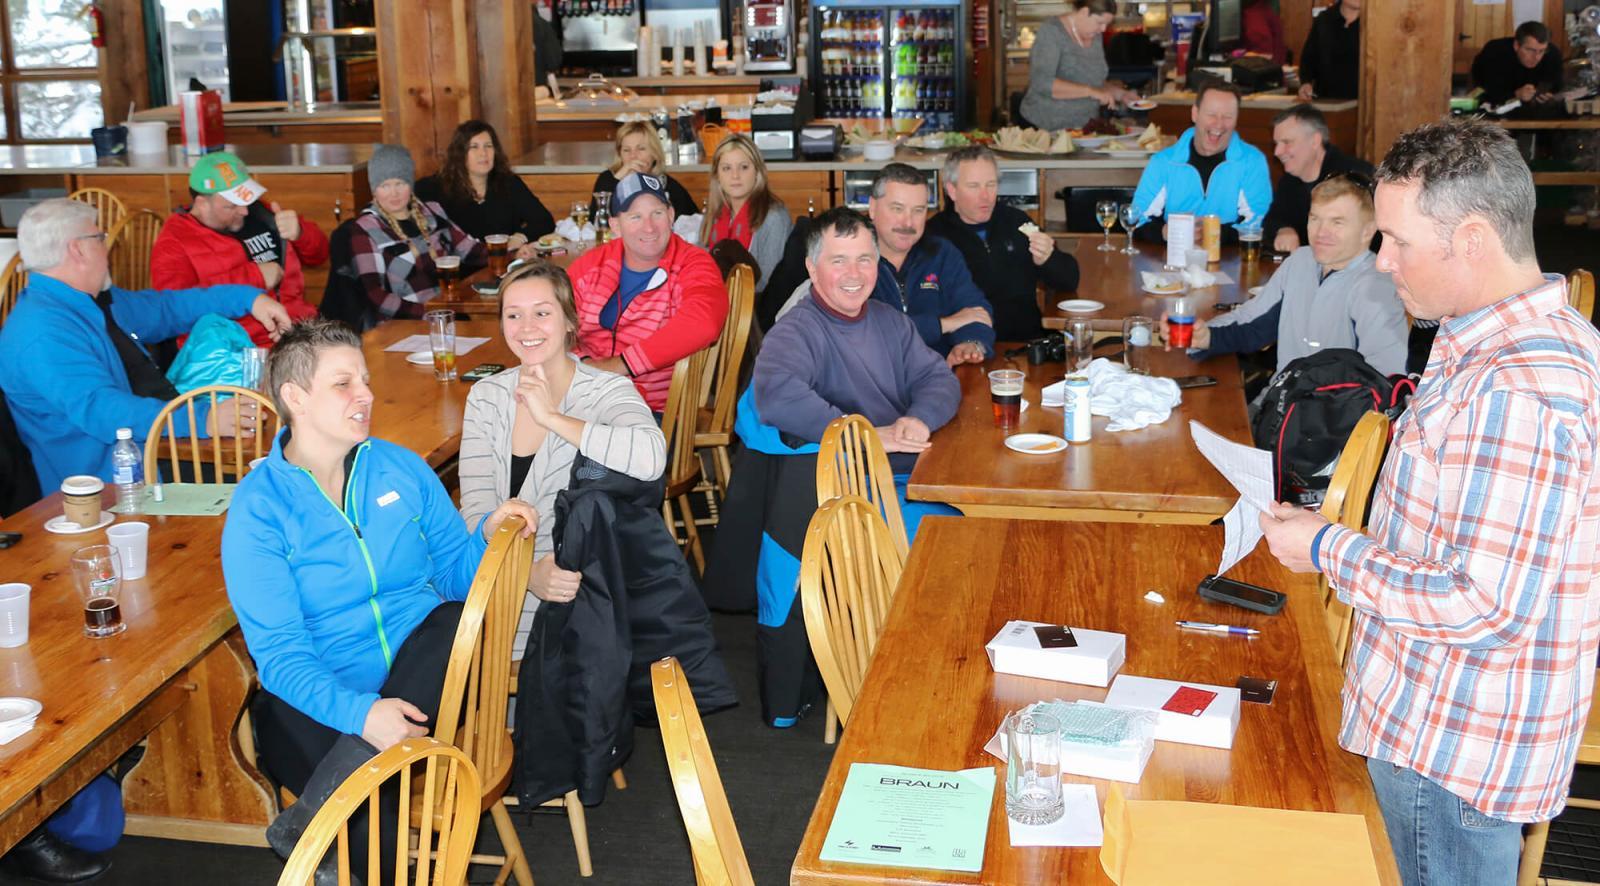 Prizes were awarded during the après ski at Osler.